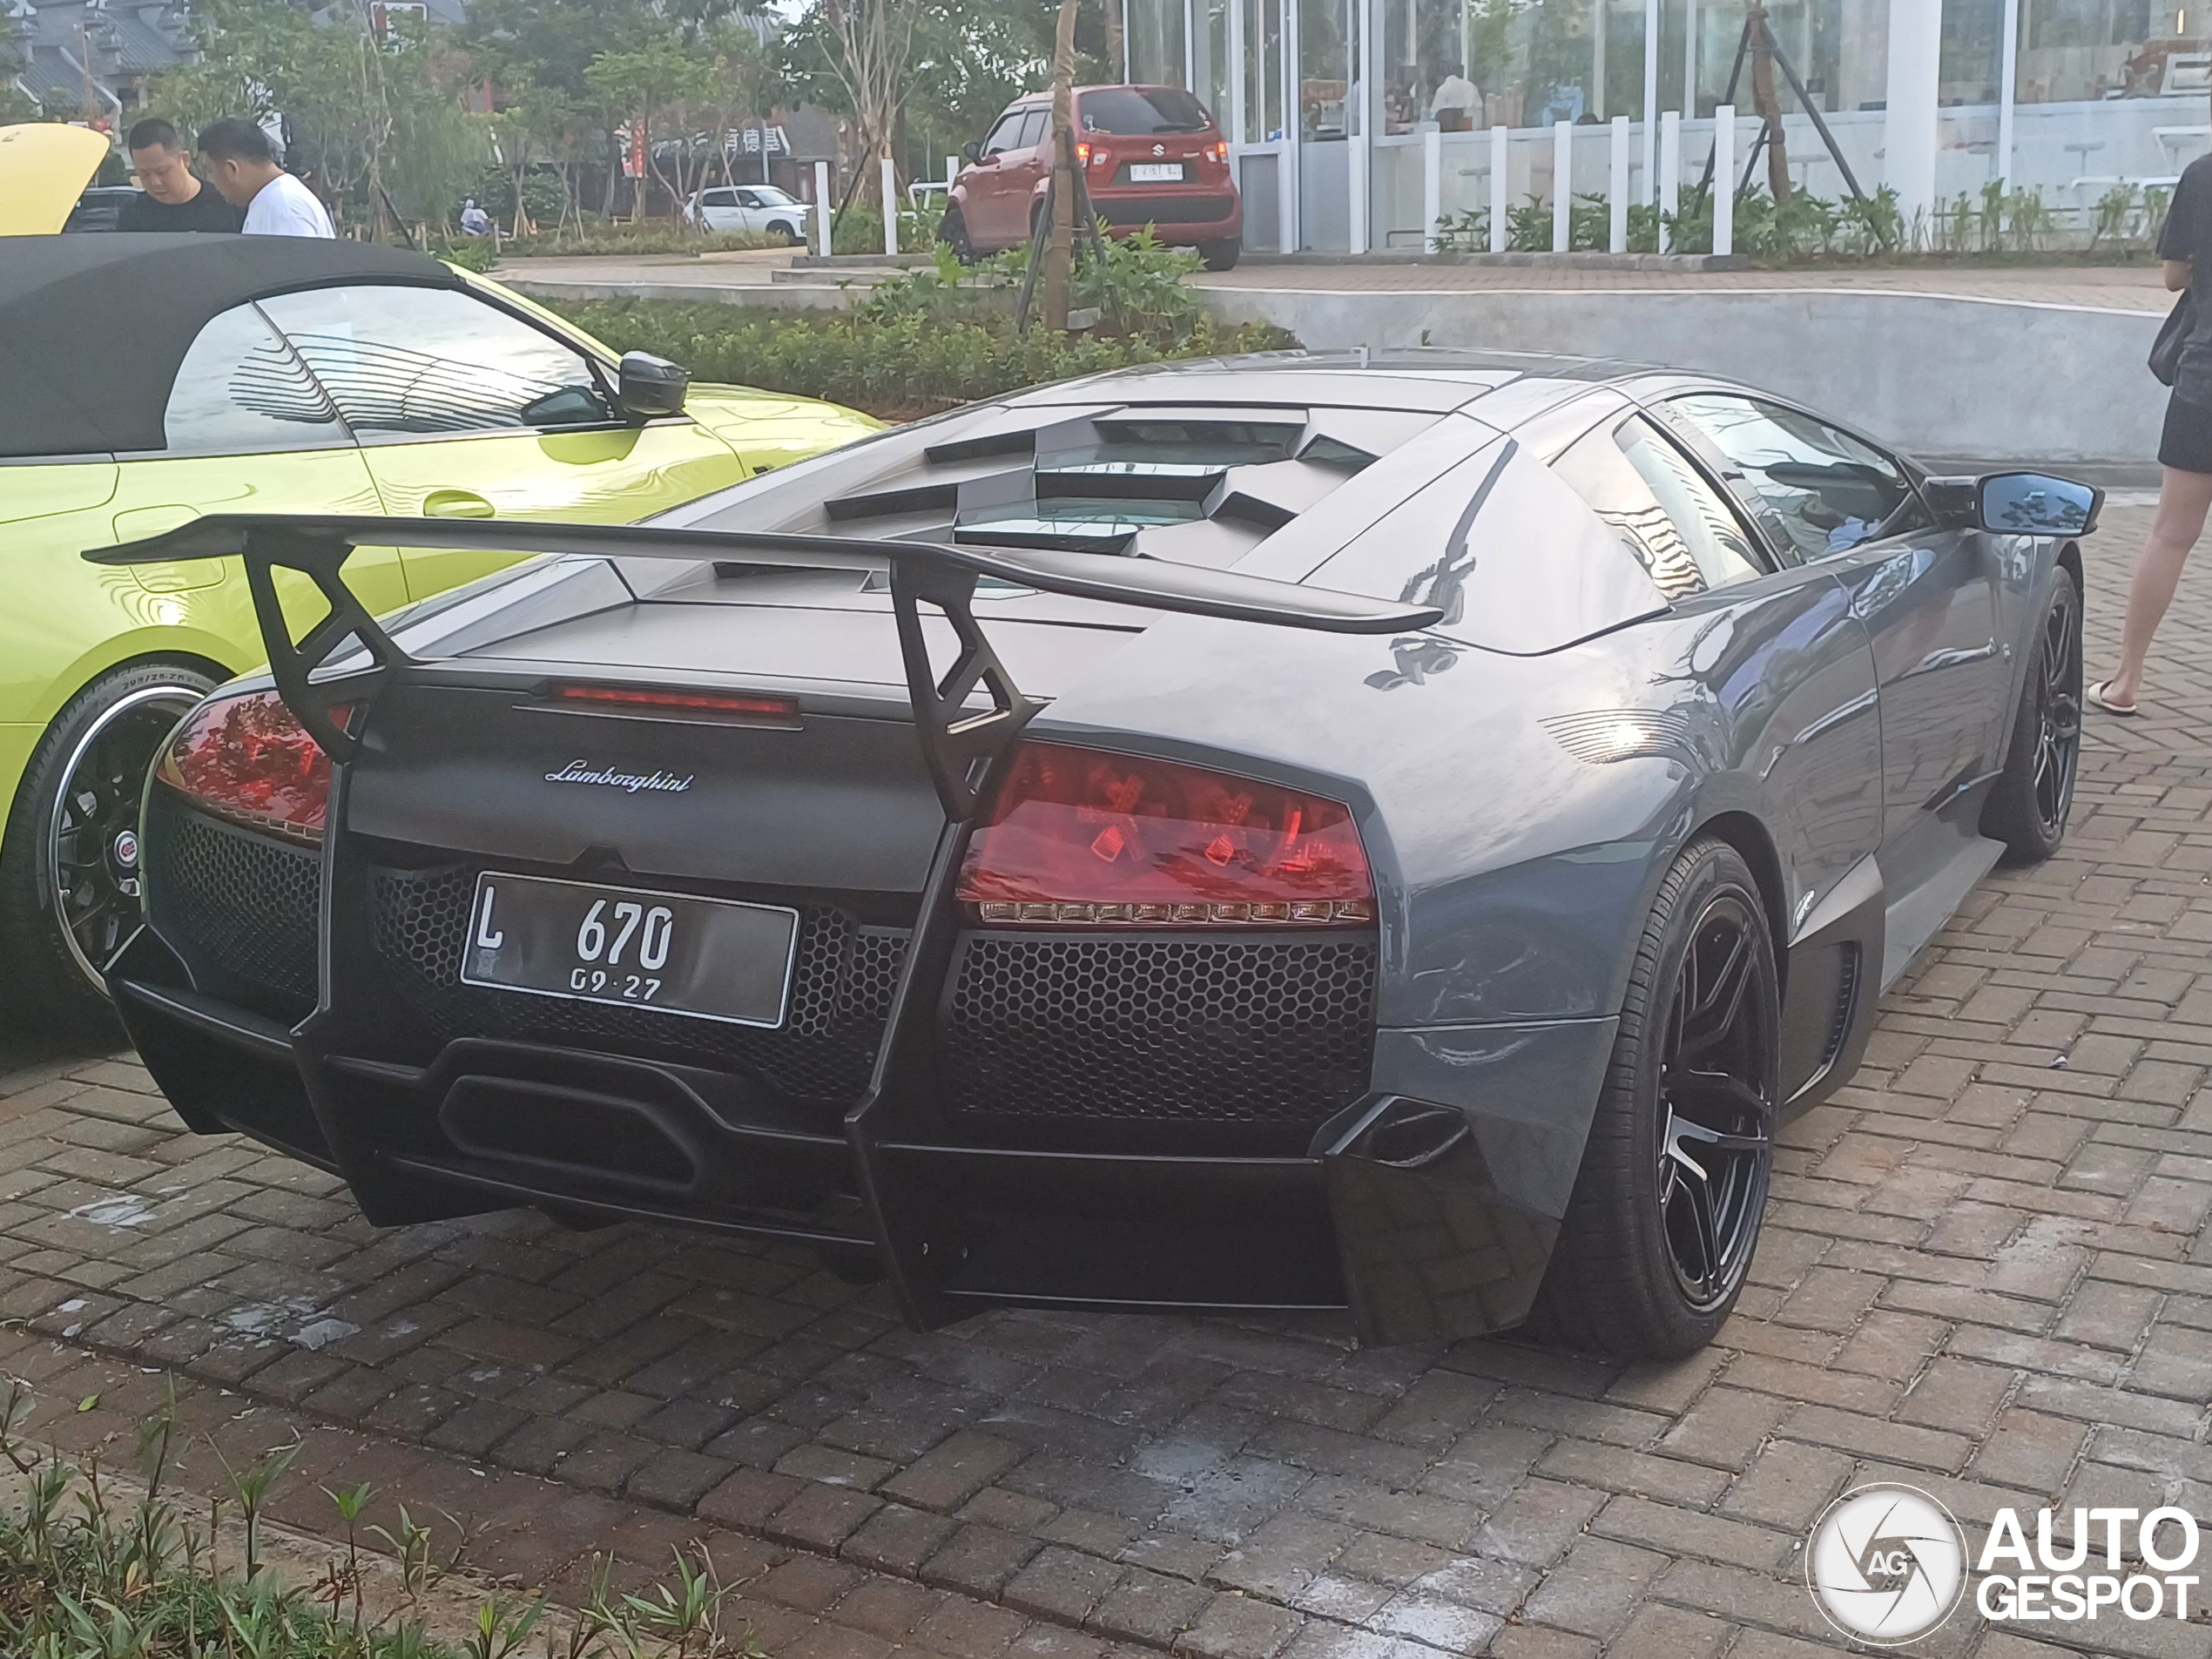 This is the very first Murciélago SV from Indonesia.